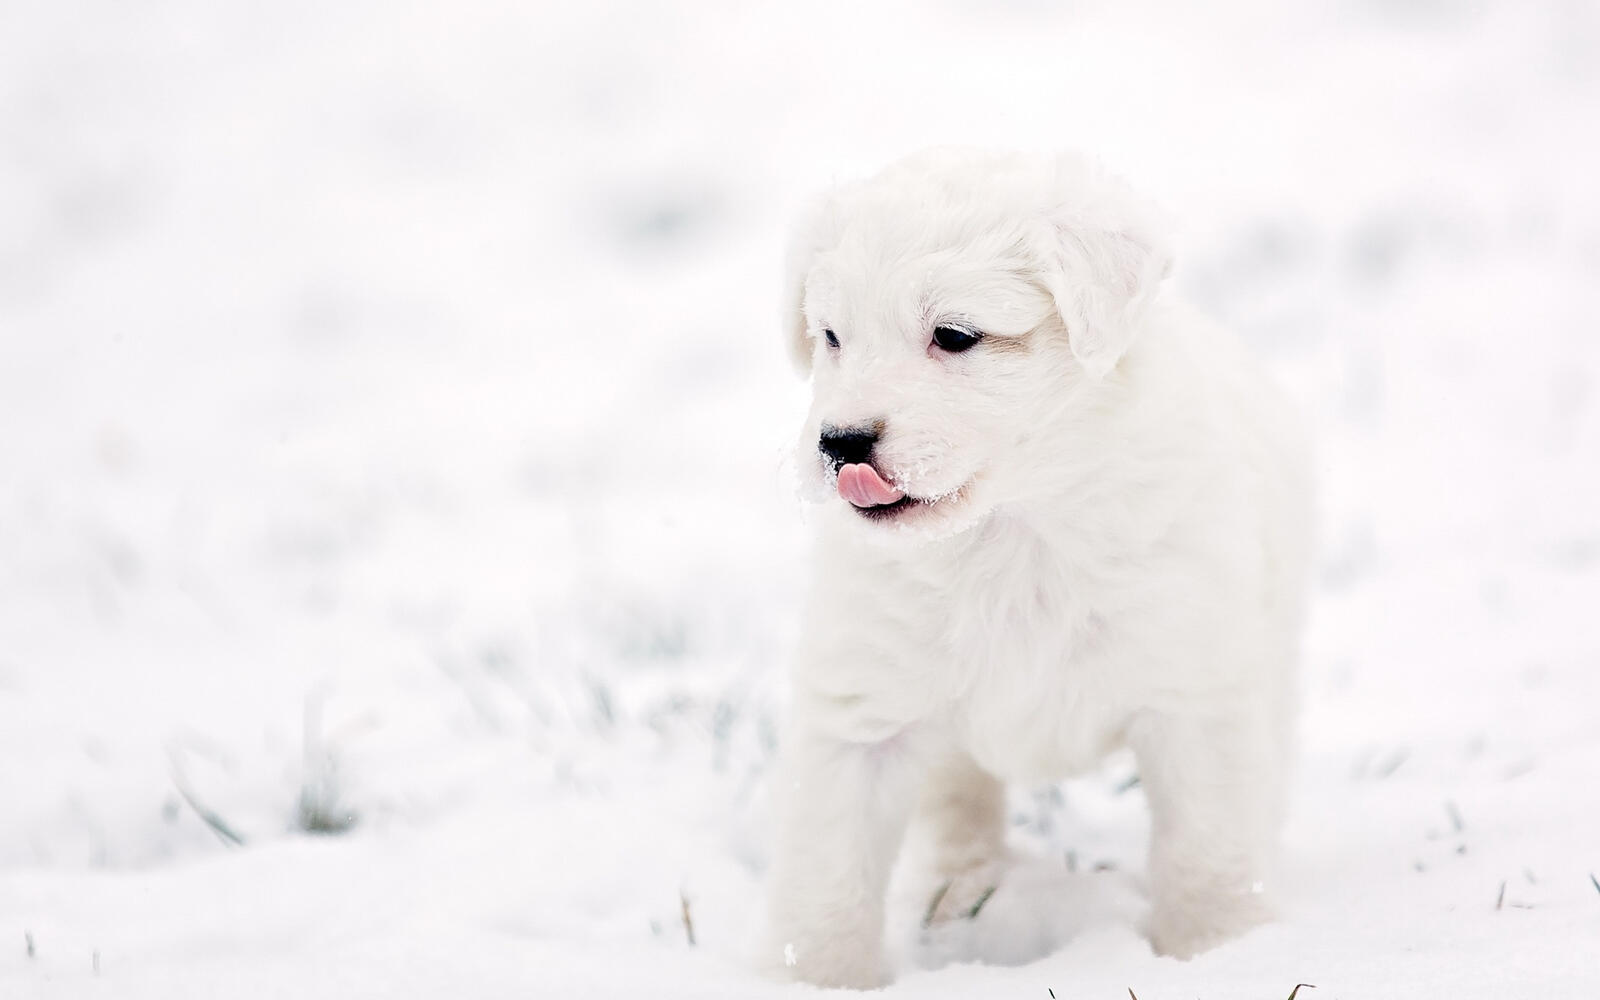 Wallpapers snow muzzle puppy on the desktop